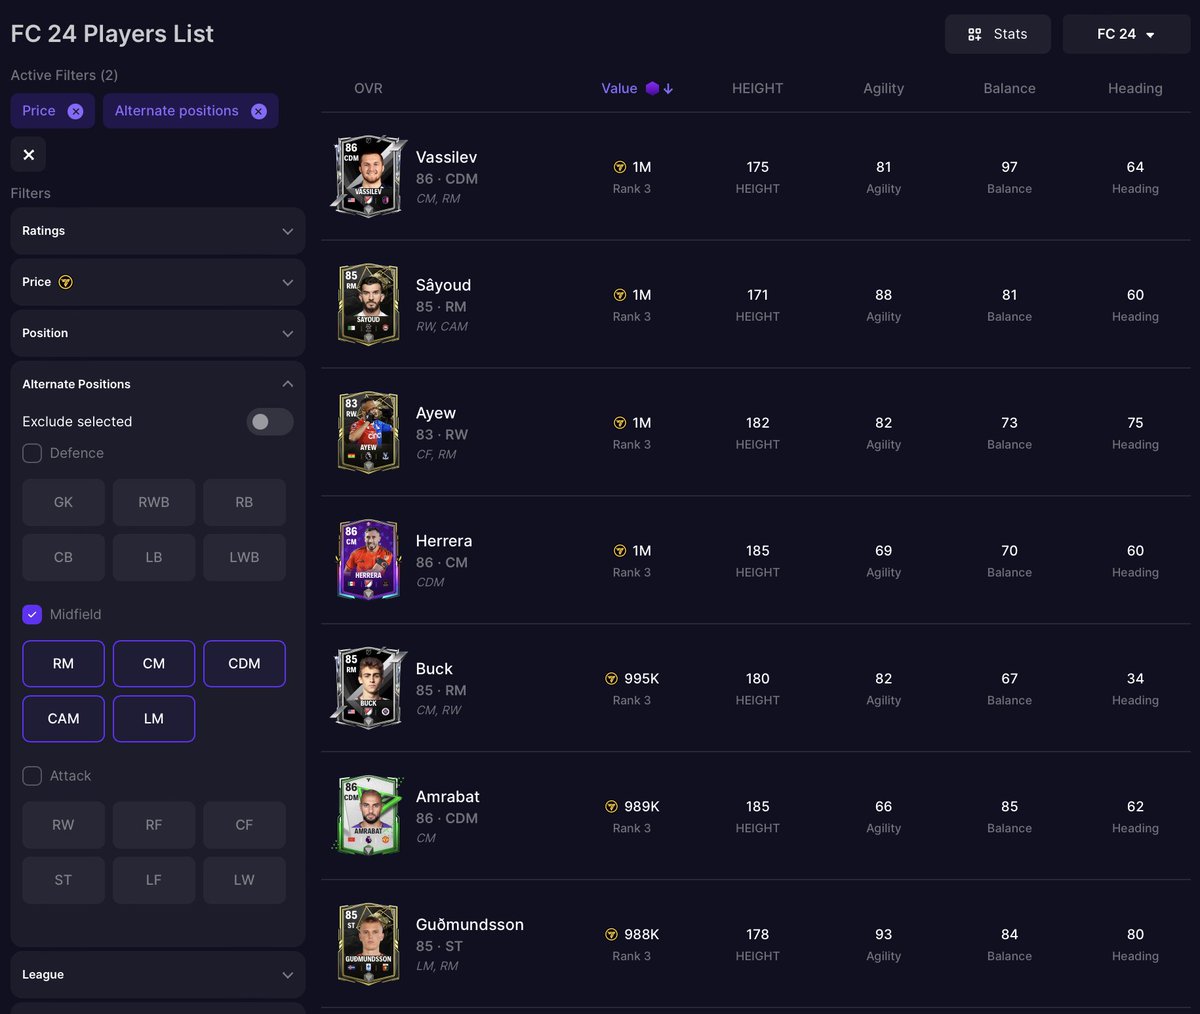 New #RenderZ features! ⚽️ Filter players based on their alternate positions 🛡️ Filter by positional groups: Attack, Midfield, or Defence 🚫 Filter out untradeable players 📈 Search by price for each rank 📊 Sort by the stats you choose to display 🔗 renderz.app